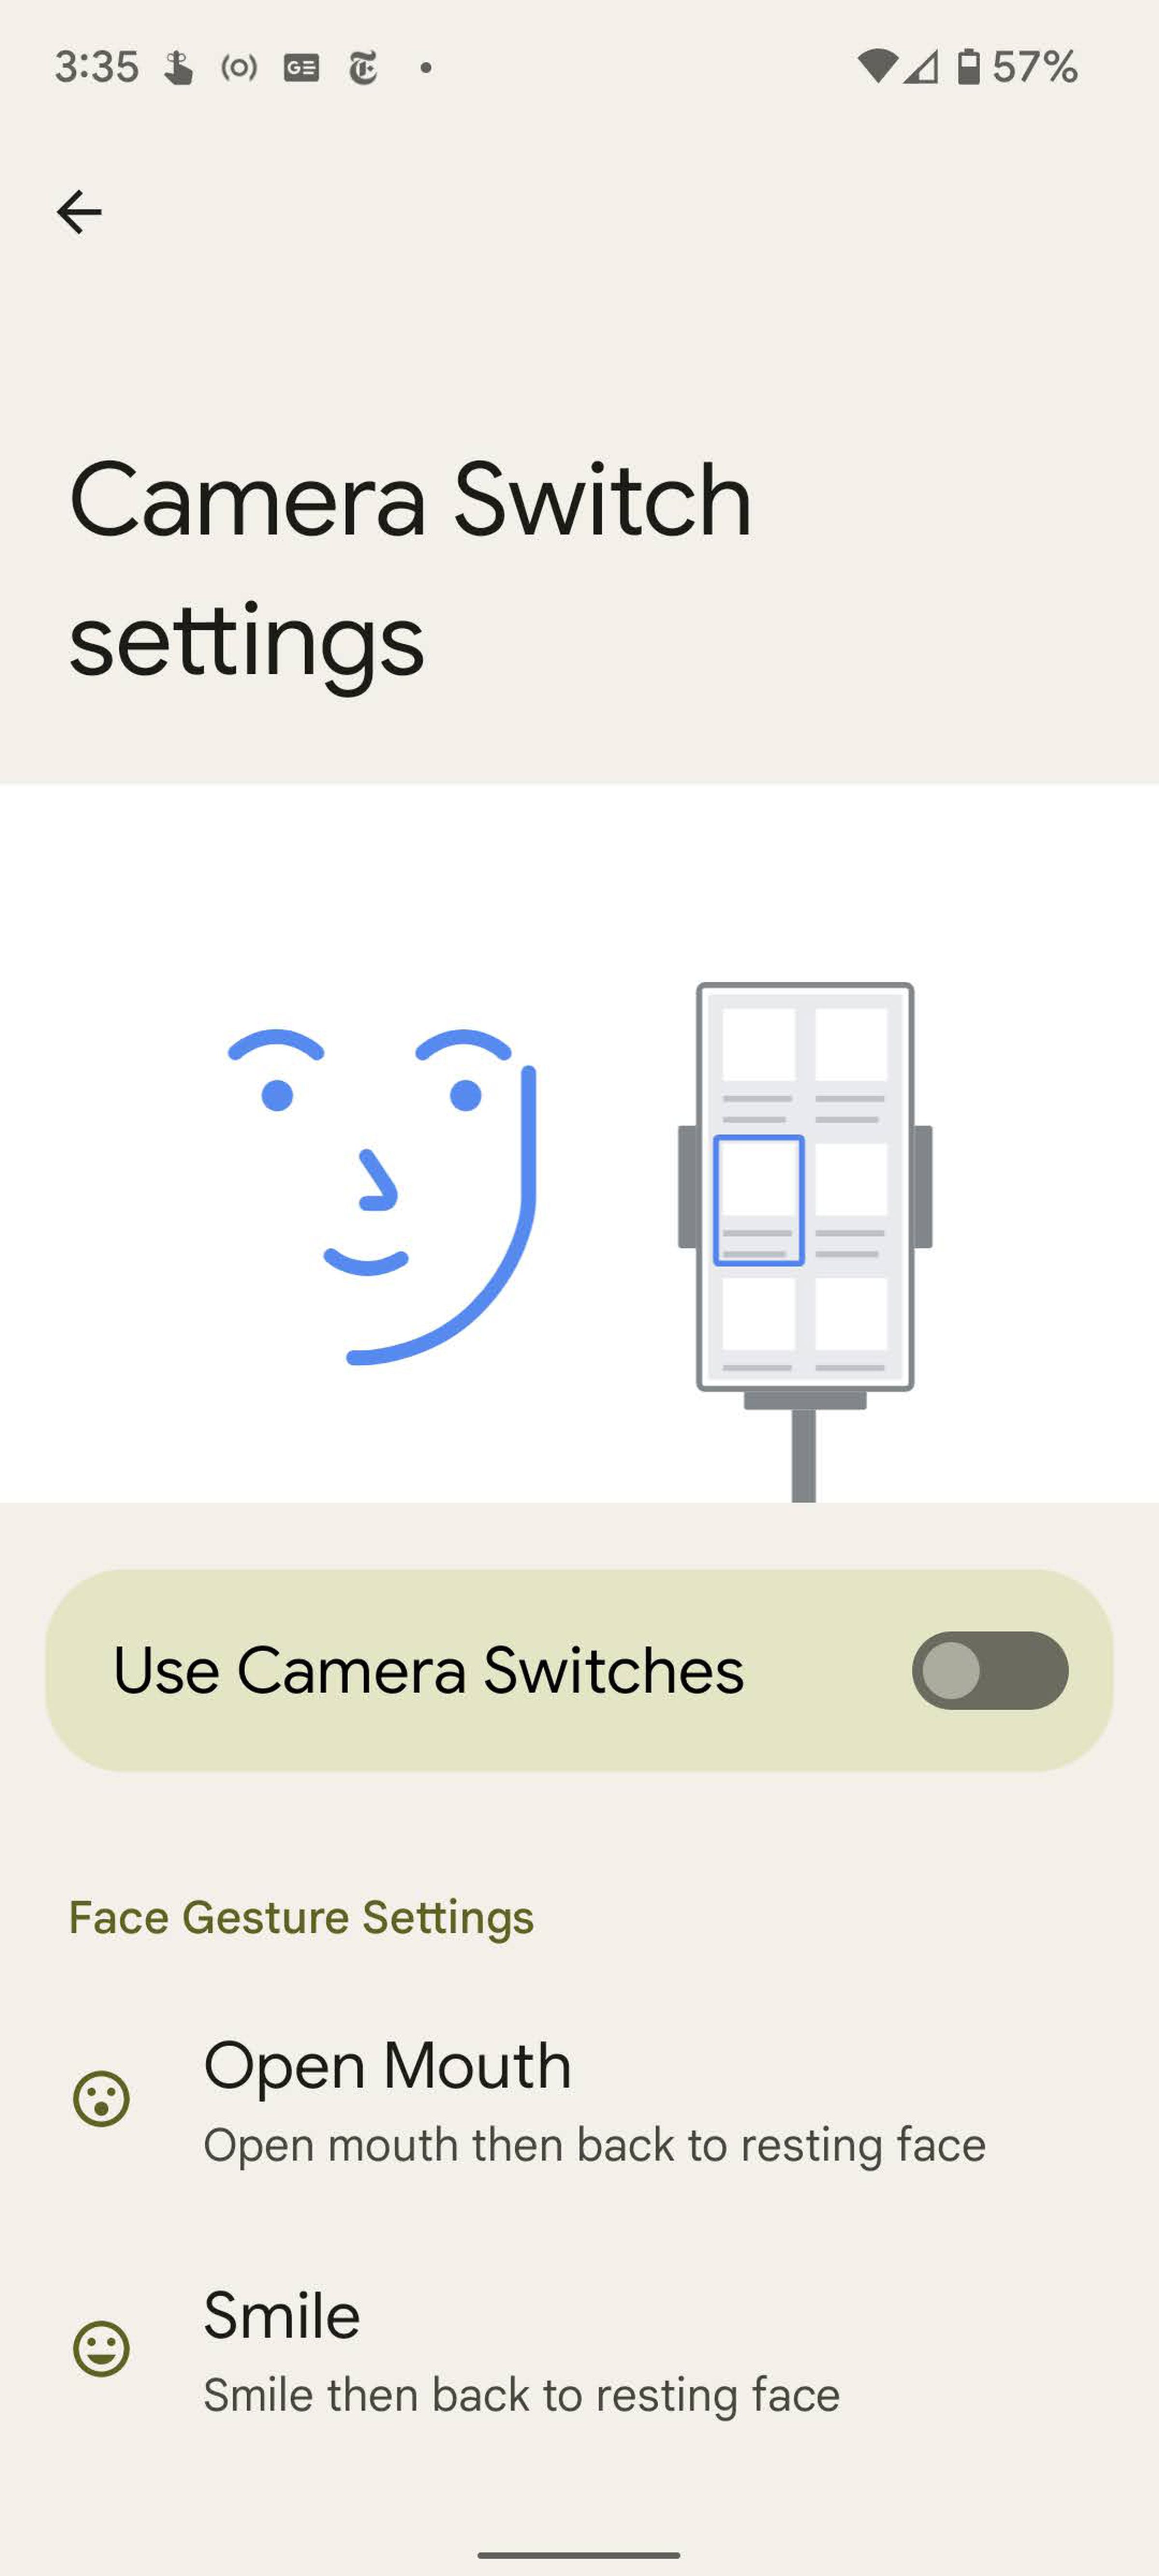 Camera Switch settings let you see if your camera can properly catch your gestures.